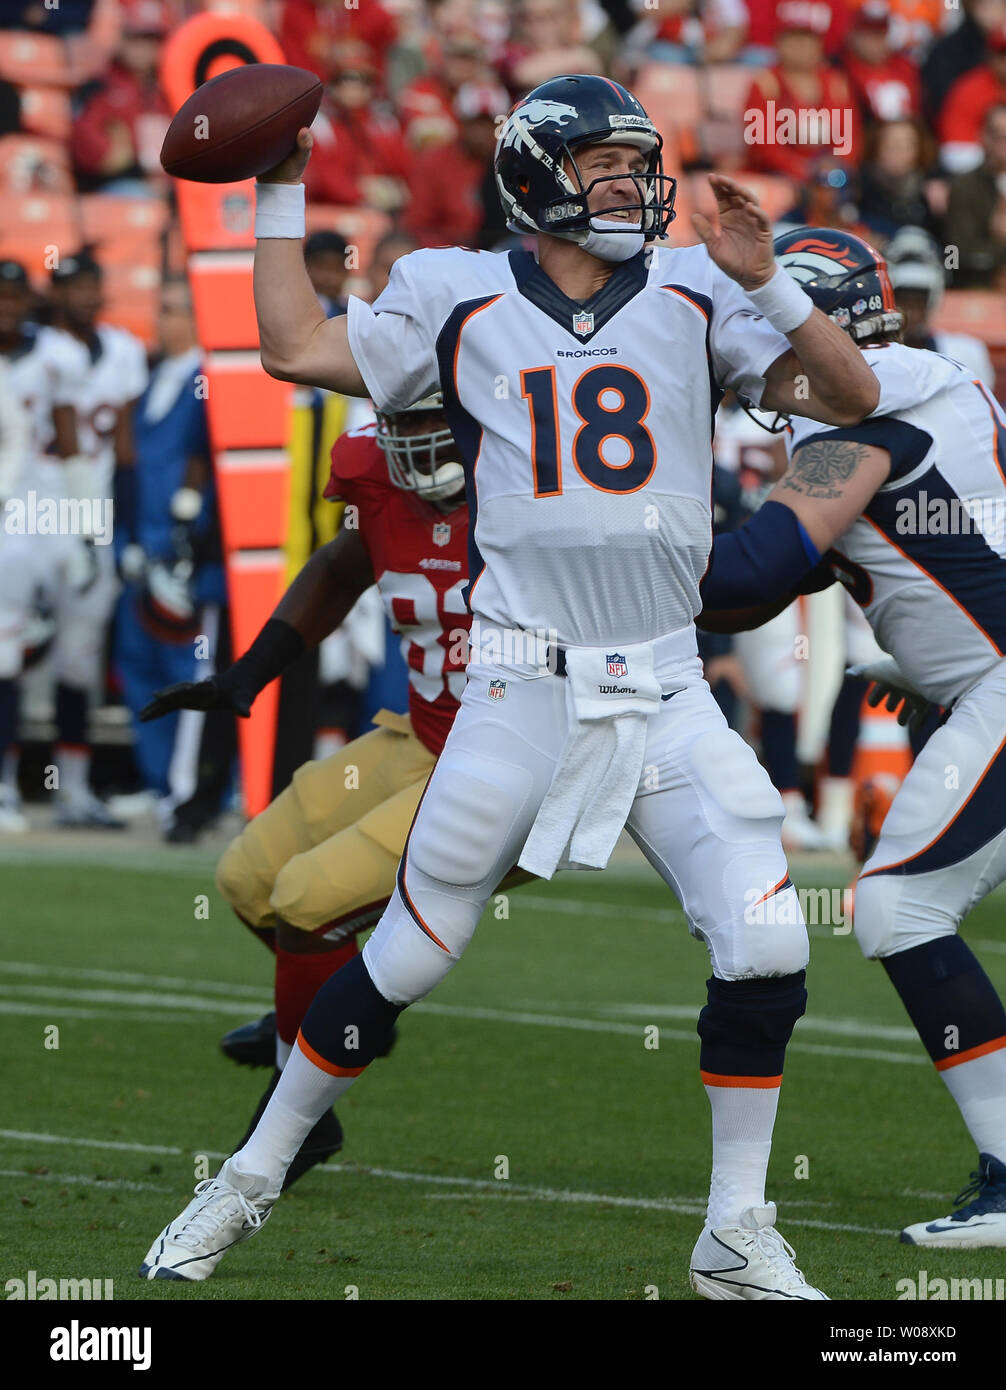 Denver Broncos QB Peyton Manning (18) passes against the San Francisco 49ers in a preseason game at Candlestick Park in San Francisco on August 8, 2013. The Broncos defeated the 49ers 10-6.      UPI/Terry Schmitt Stock Photo